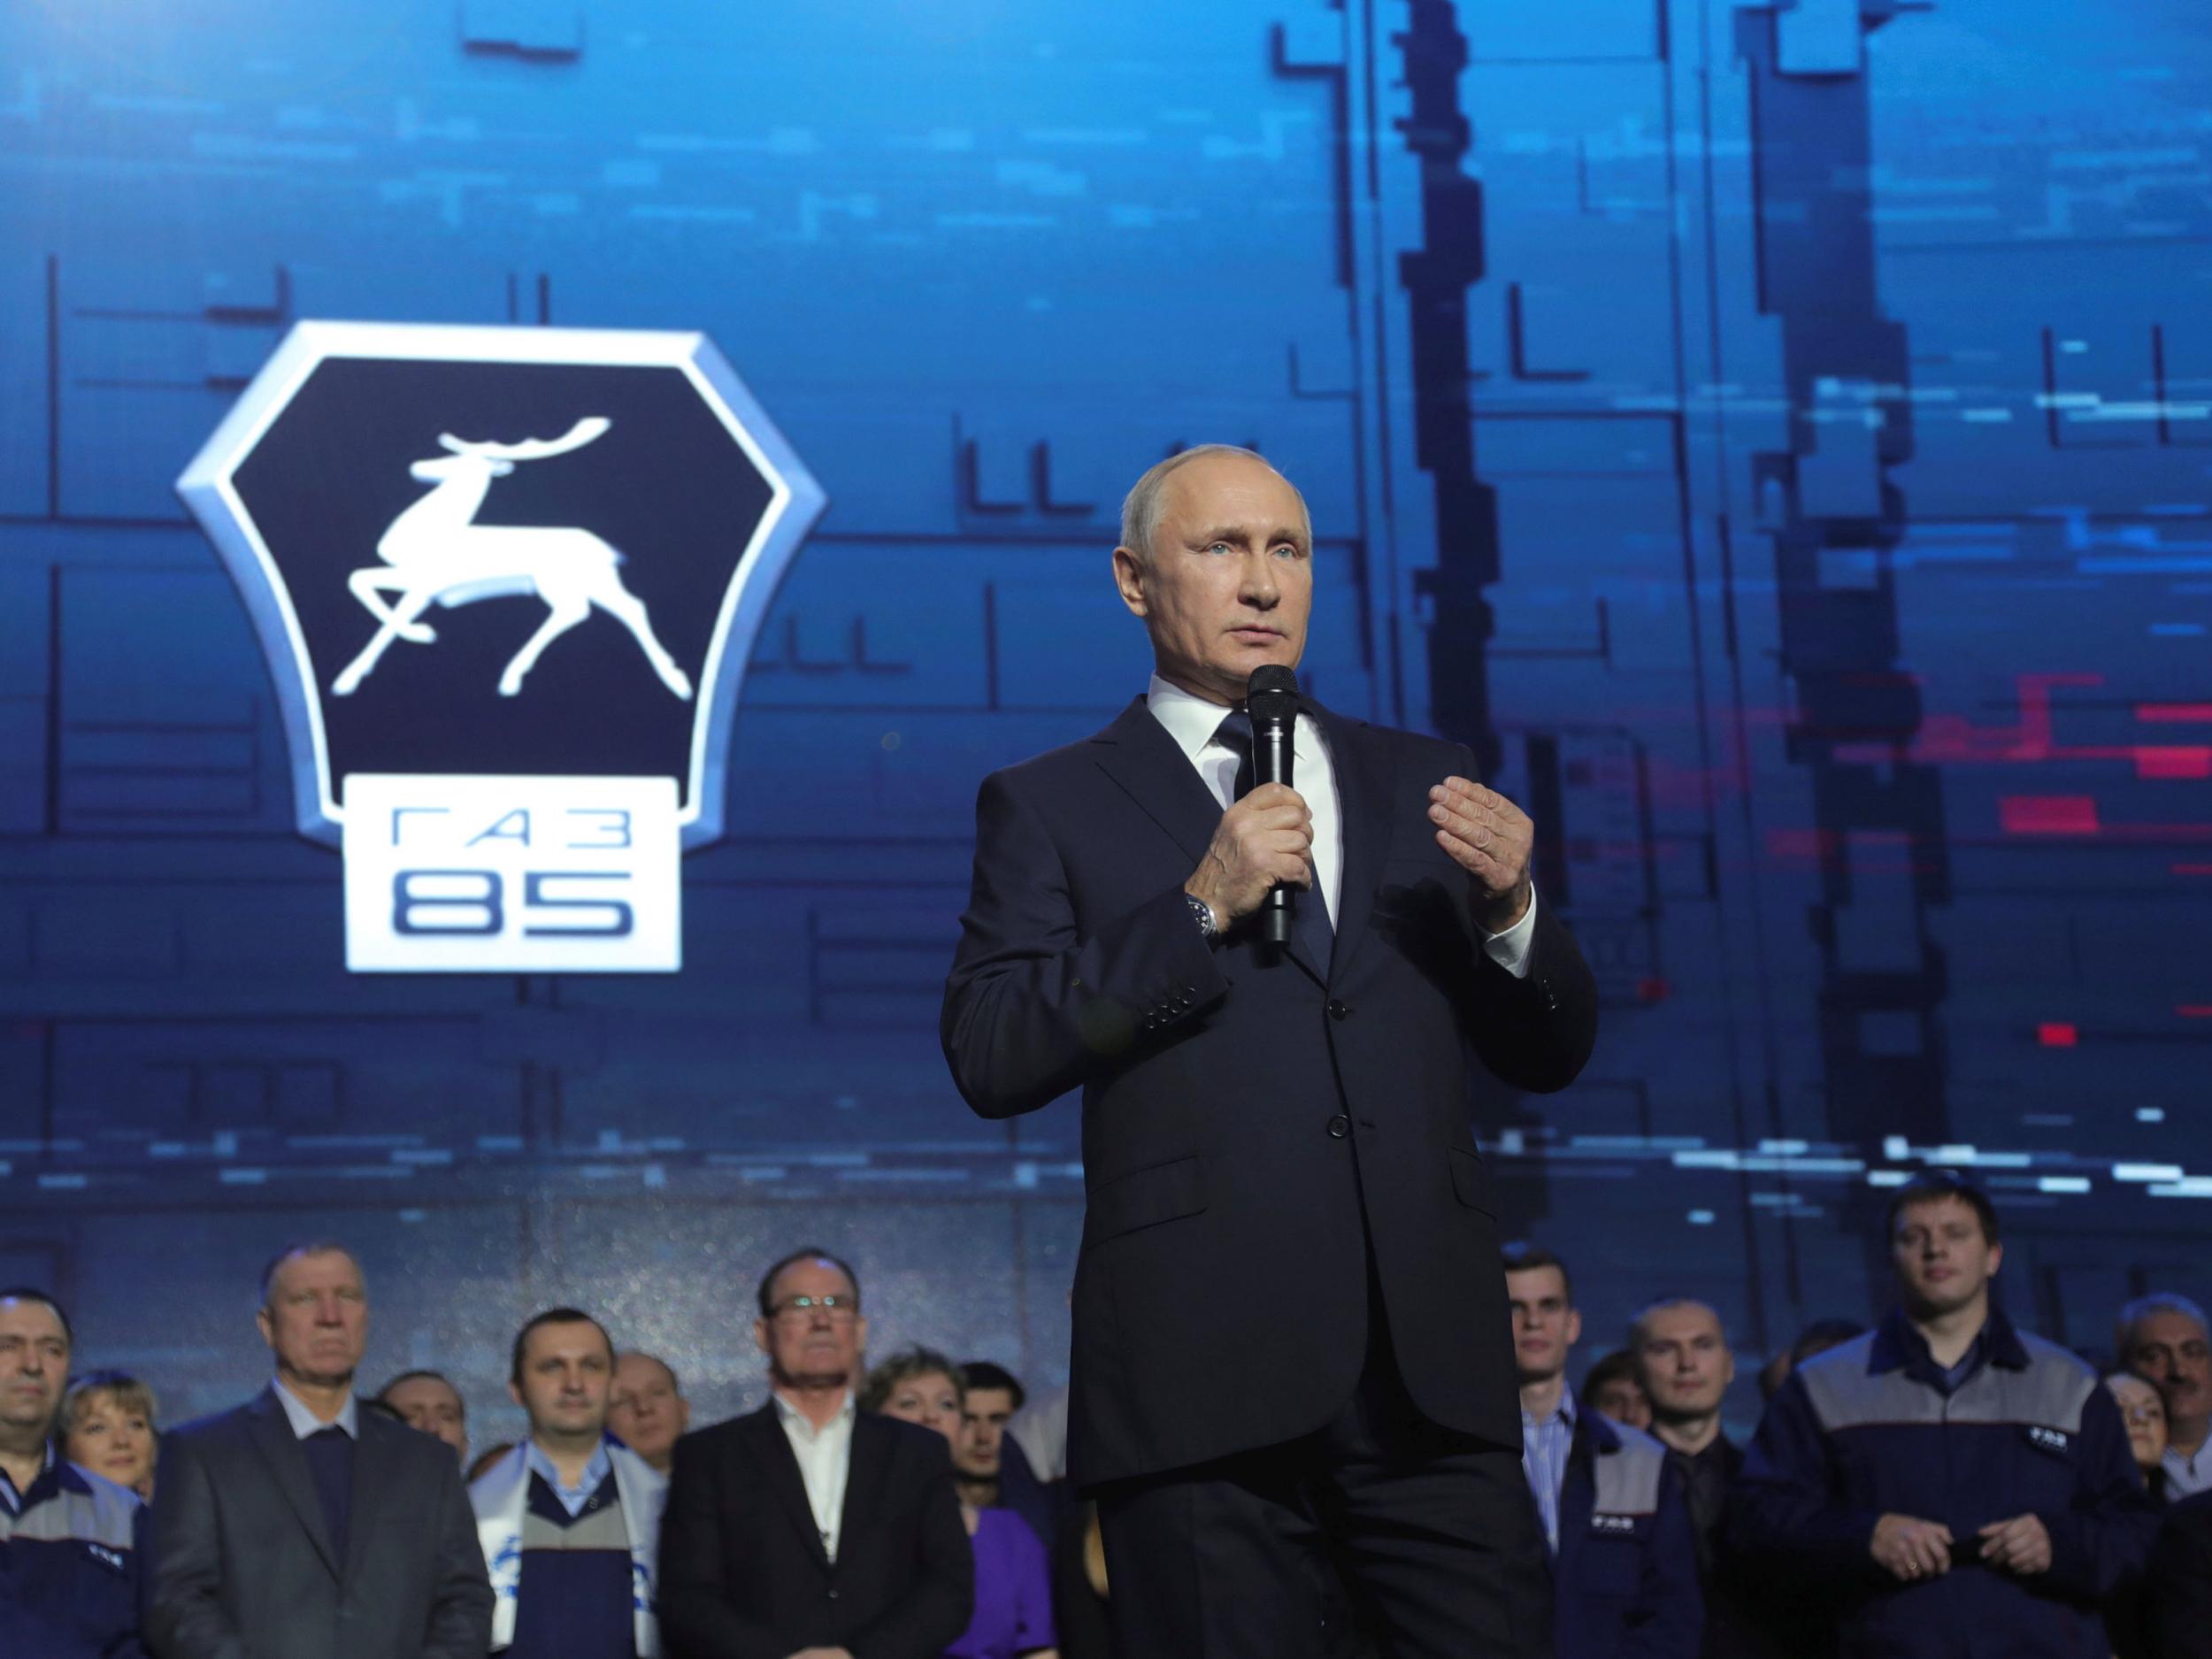 The Russian leader made the announcement at a meeting with workers of a car factory